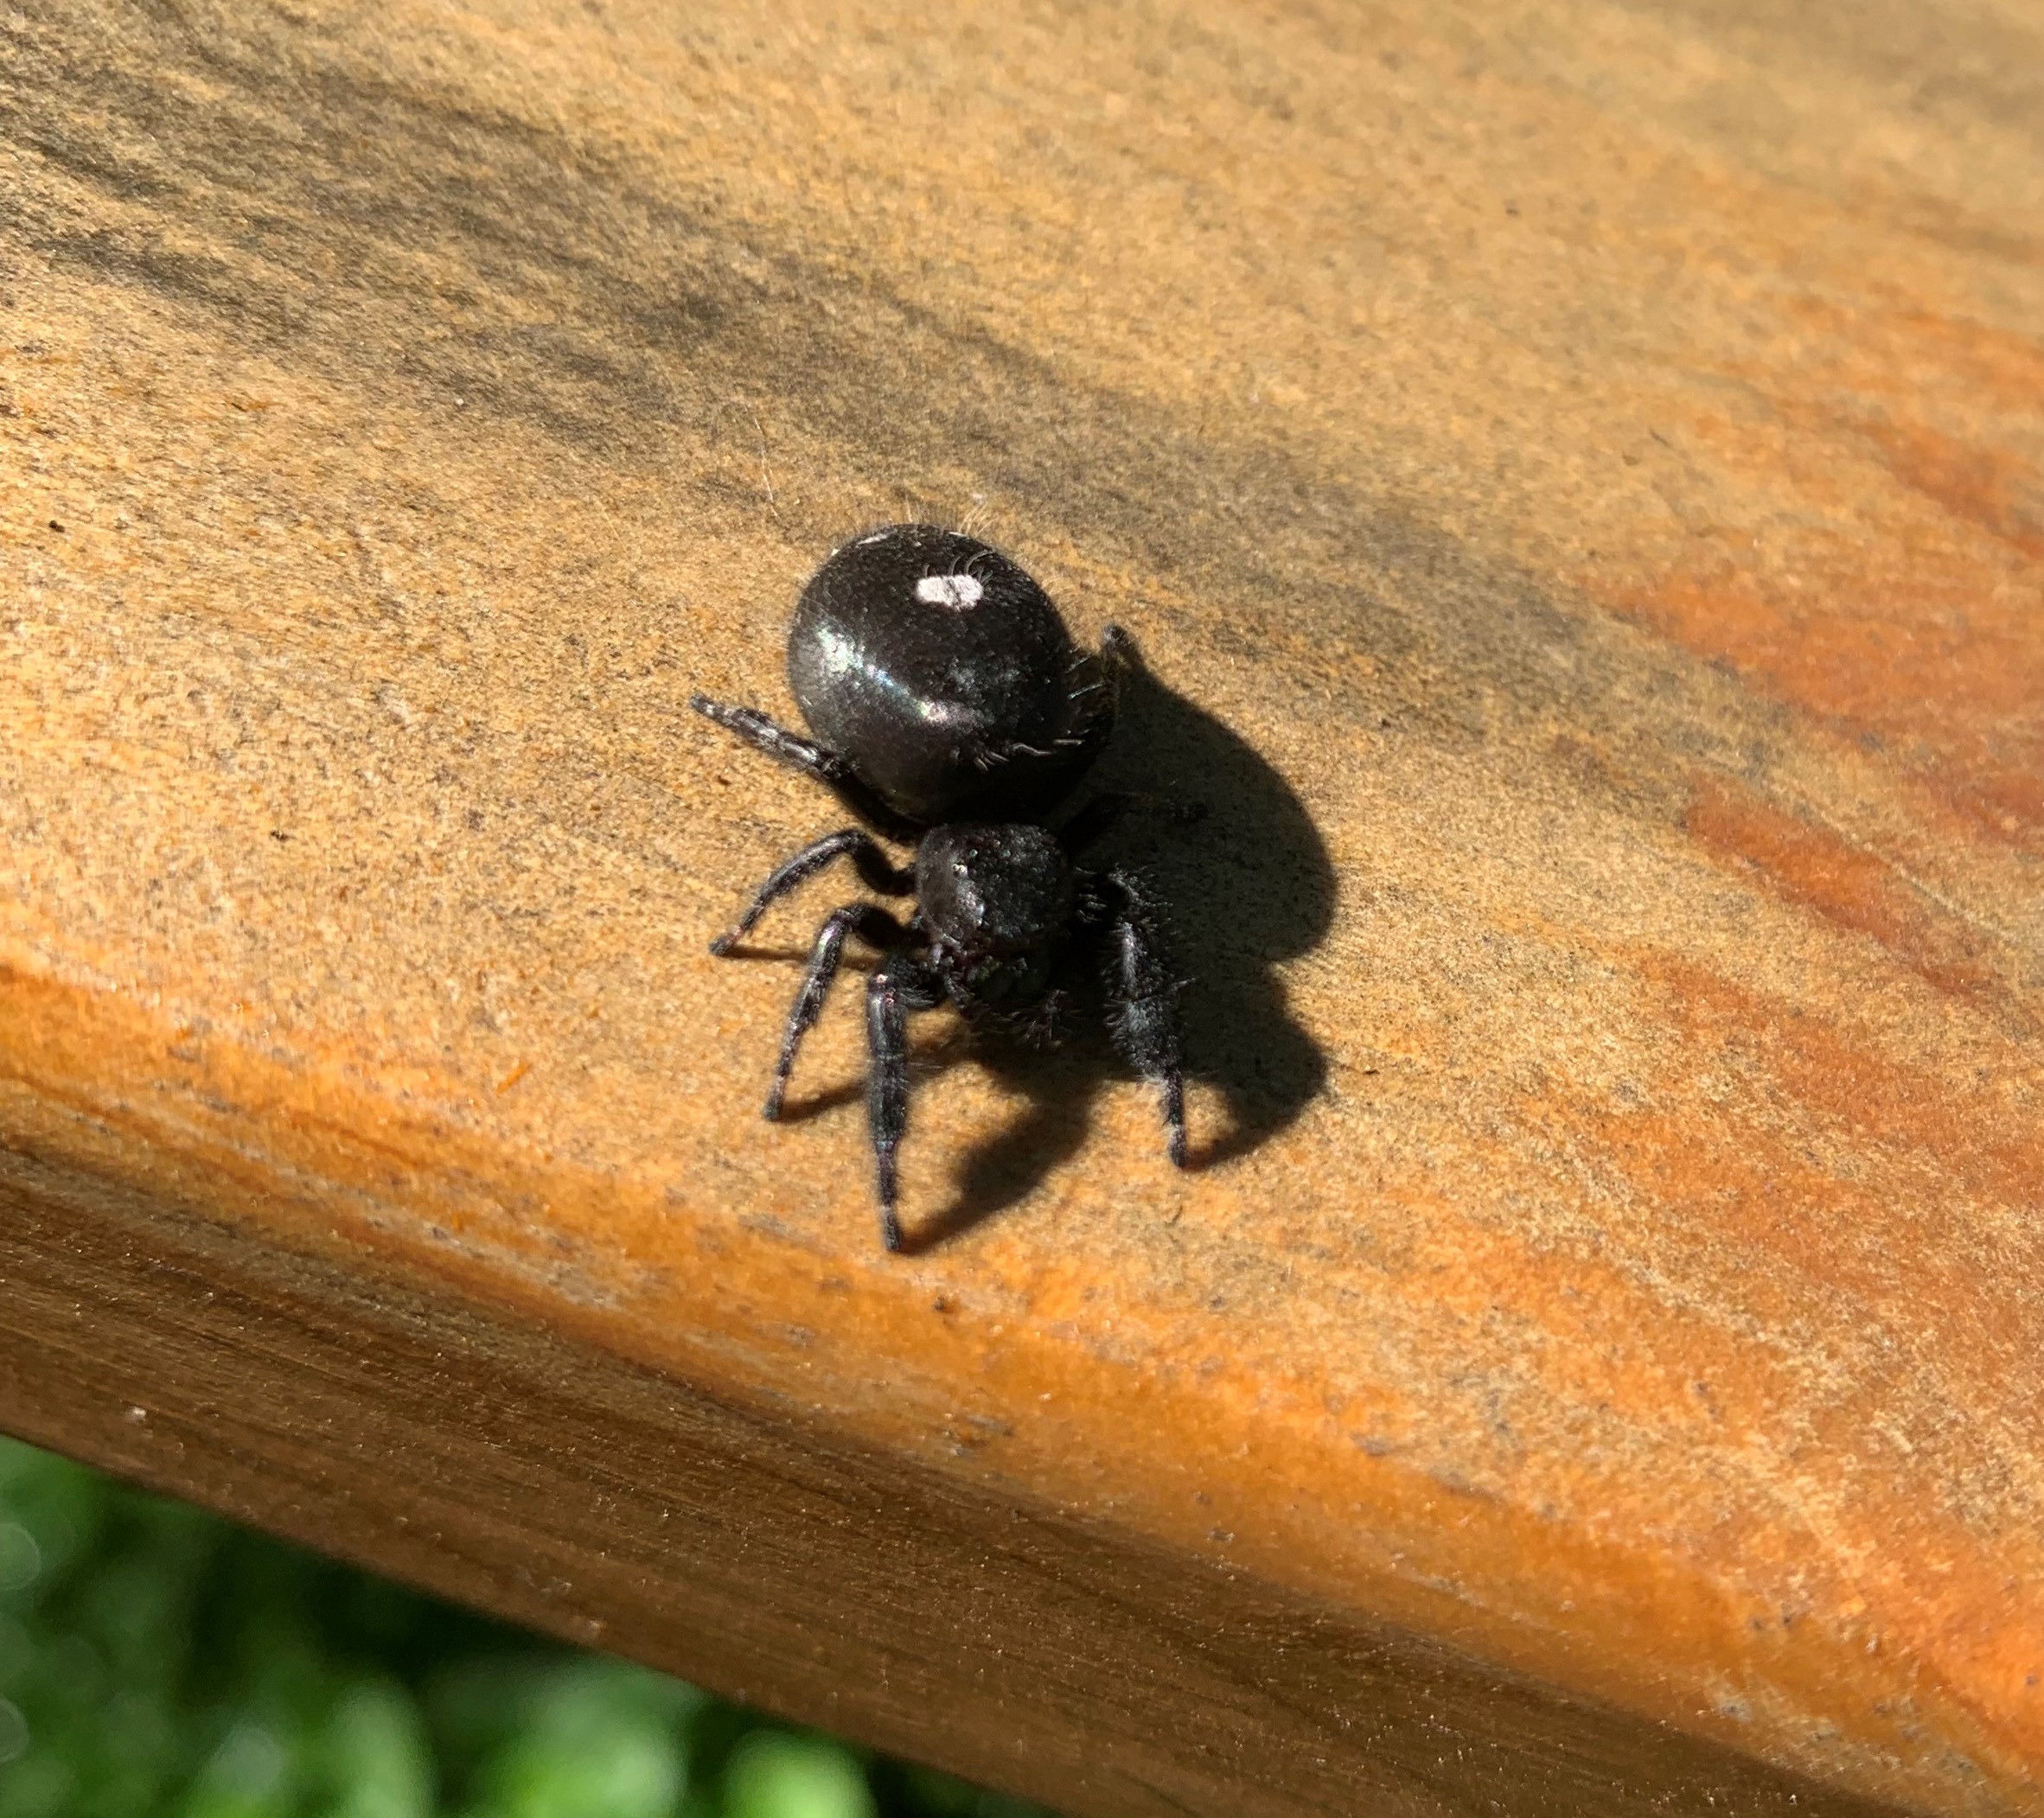 Black spider with short legs and a white spot on its abdomen sits on a wood picnic table in the sunshine